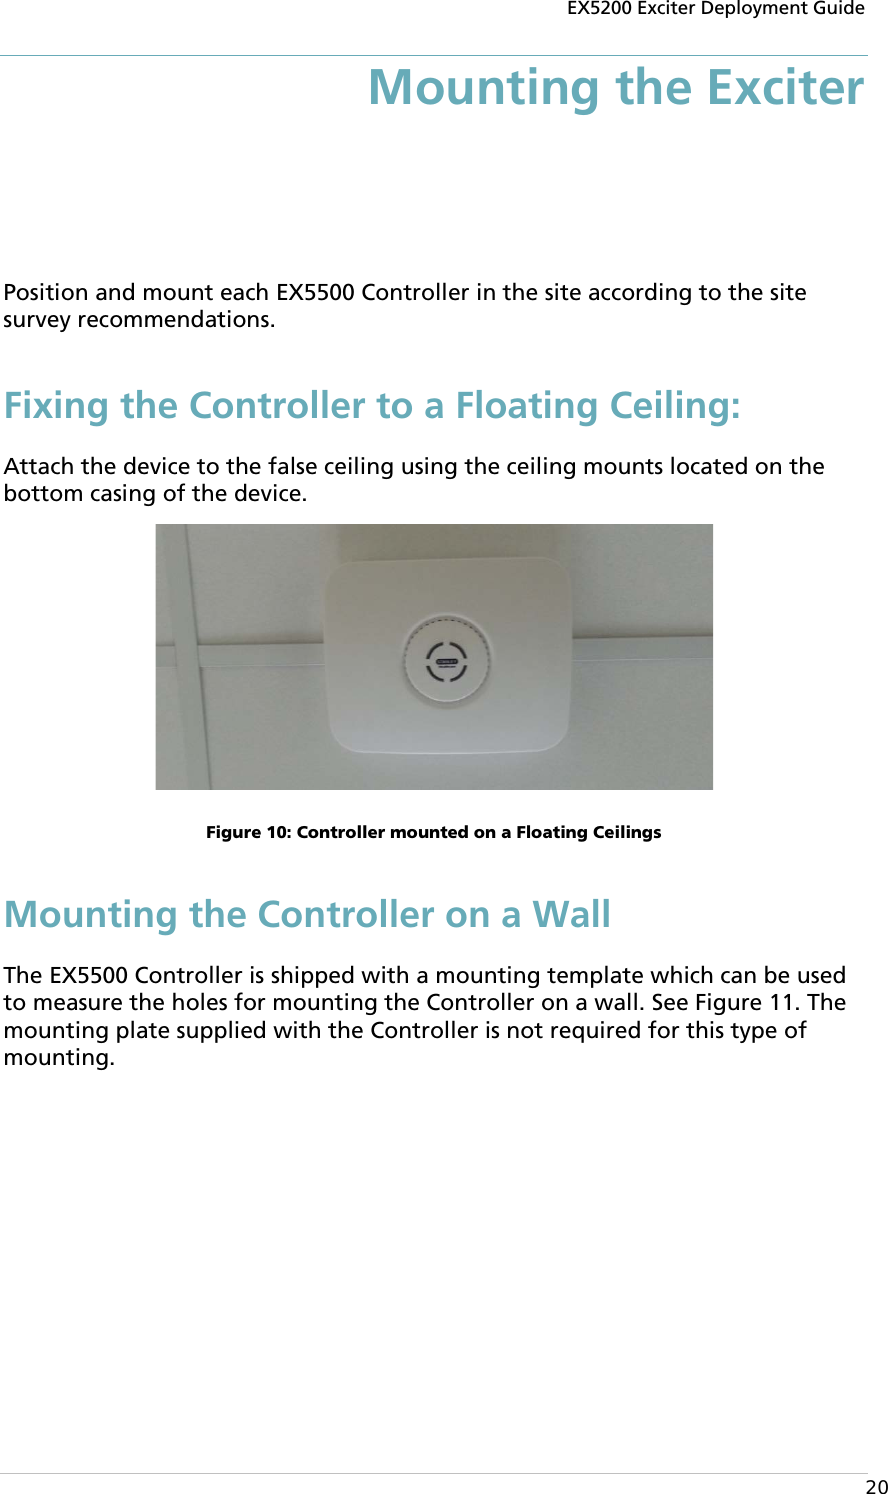 EX5200 Exciter Deployment Guide  20 Mounting the Exciter  Position and mount each EX5500 Controller in the site according to the site survey recommendations. Fixing the Controller to a Floating Ceiling: Attach the device to the false ceiling using the ceiling mounts located on the bottom casing of the device.   Figure 10: Controller mounted on a Floating Ceilings Mounting the Controller on a Wall The EX5500 Controller is shipped with a mounting template which can be used to measure the holes for mounting the Controller on a wall. See Figure 11. The mounting plate supplied with the Controller is not required for this type of mounting. 